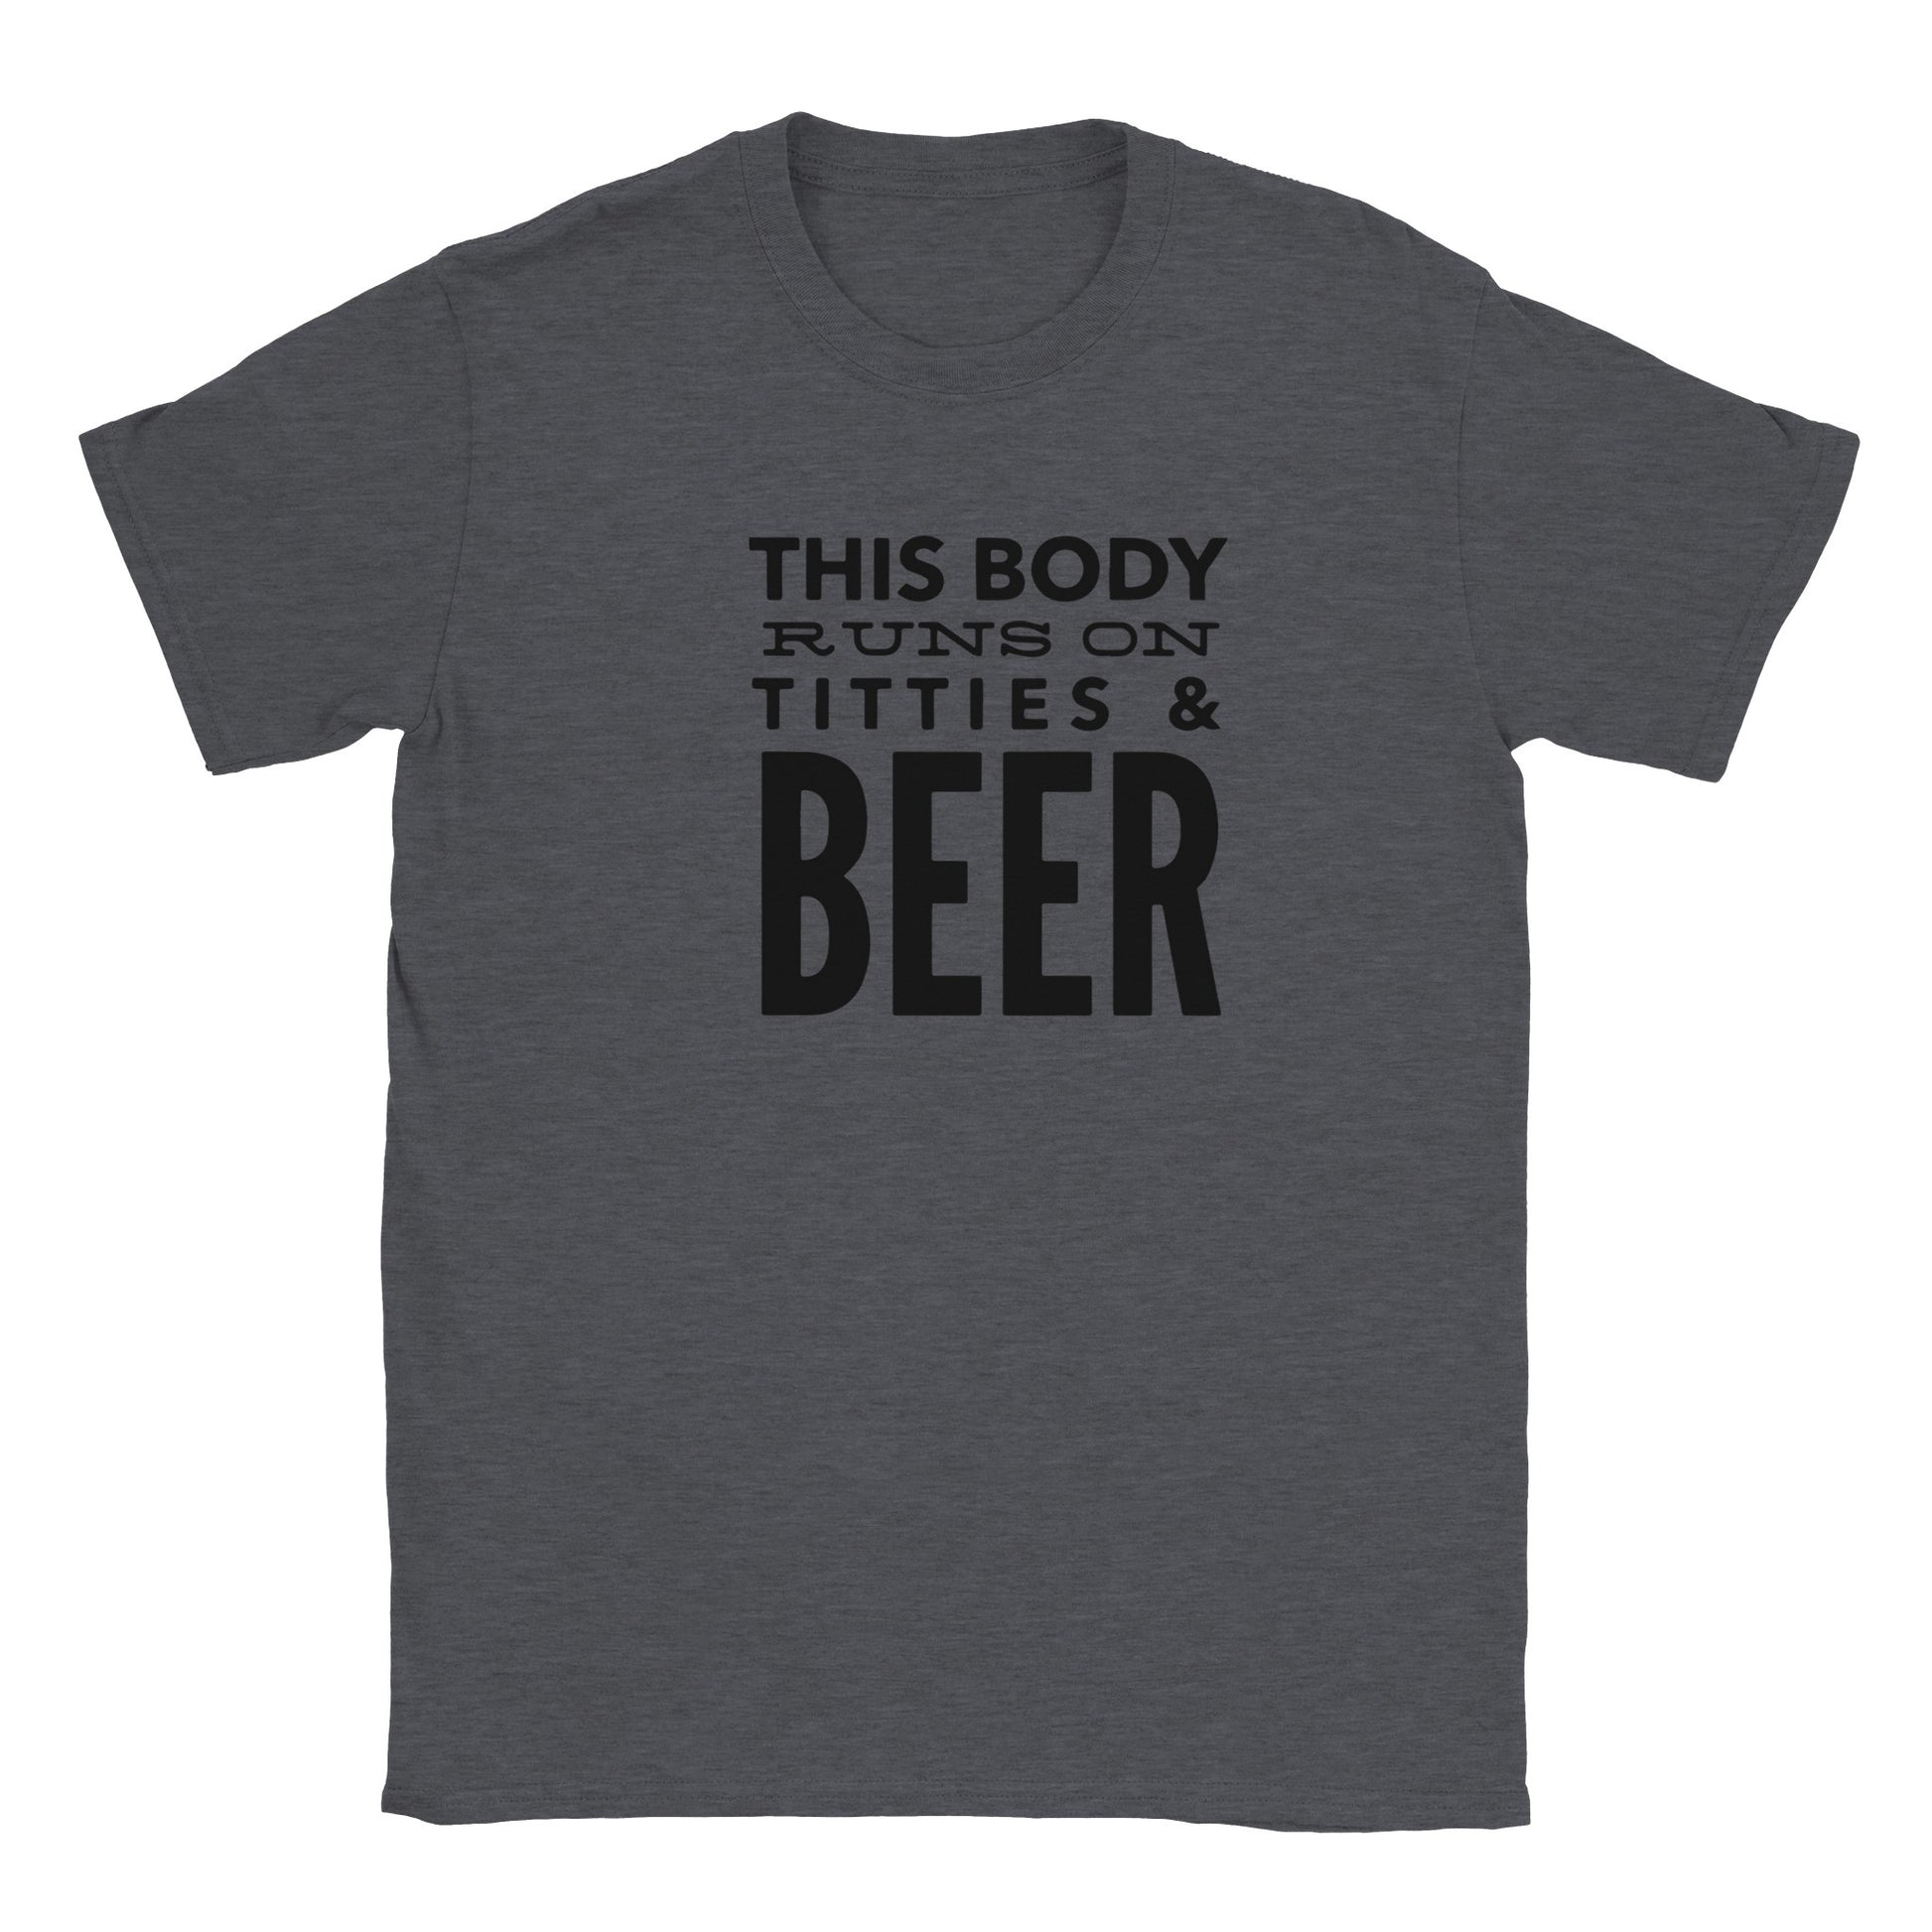 This Body Runs on Titties and Beer T-shirt - Mister Snarky's